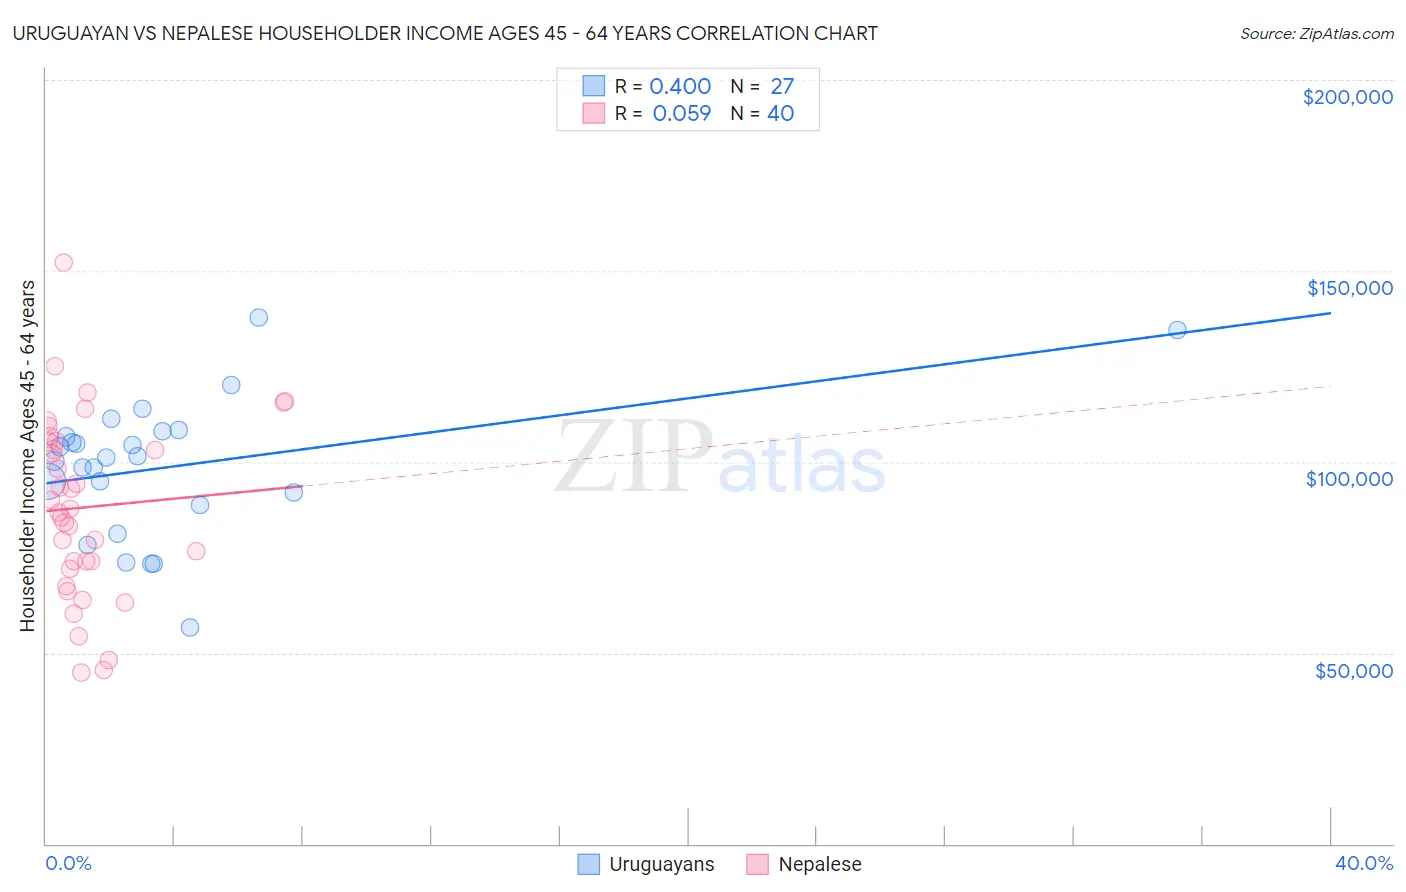 Uruguayan vs Nepalese Householder Income Ages 45 - 64 years